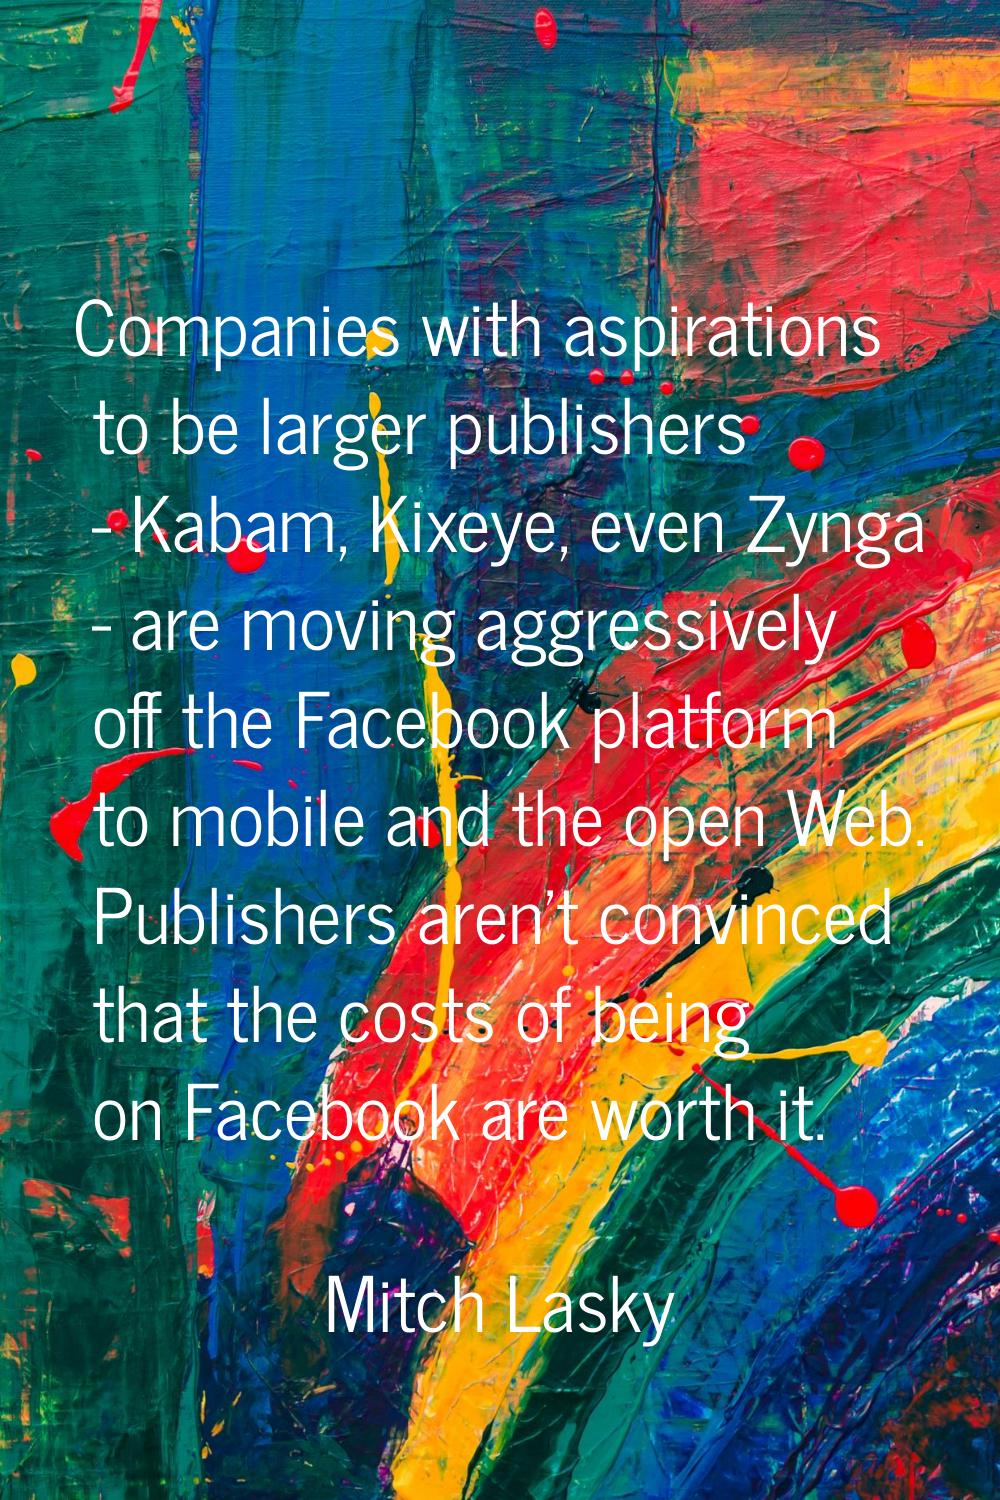 Companies with aspirations to be larger publishers - Kabam, Kixeye, even Zynga - are moving aggress